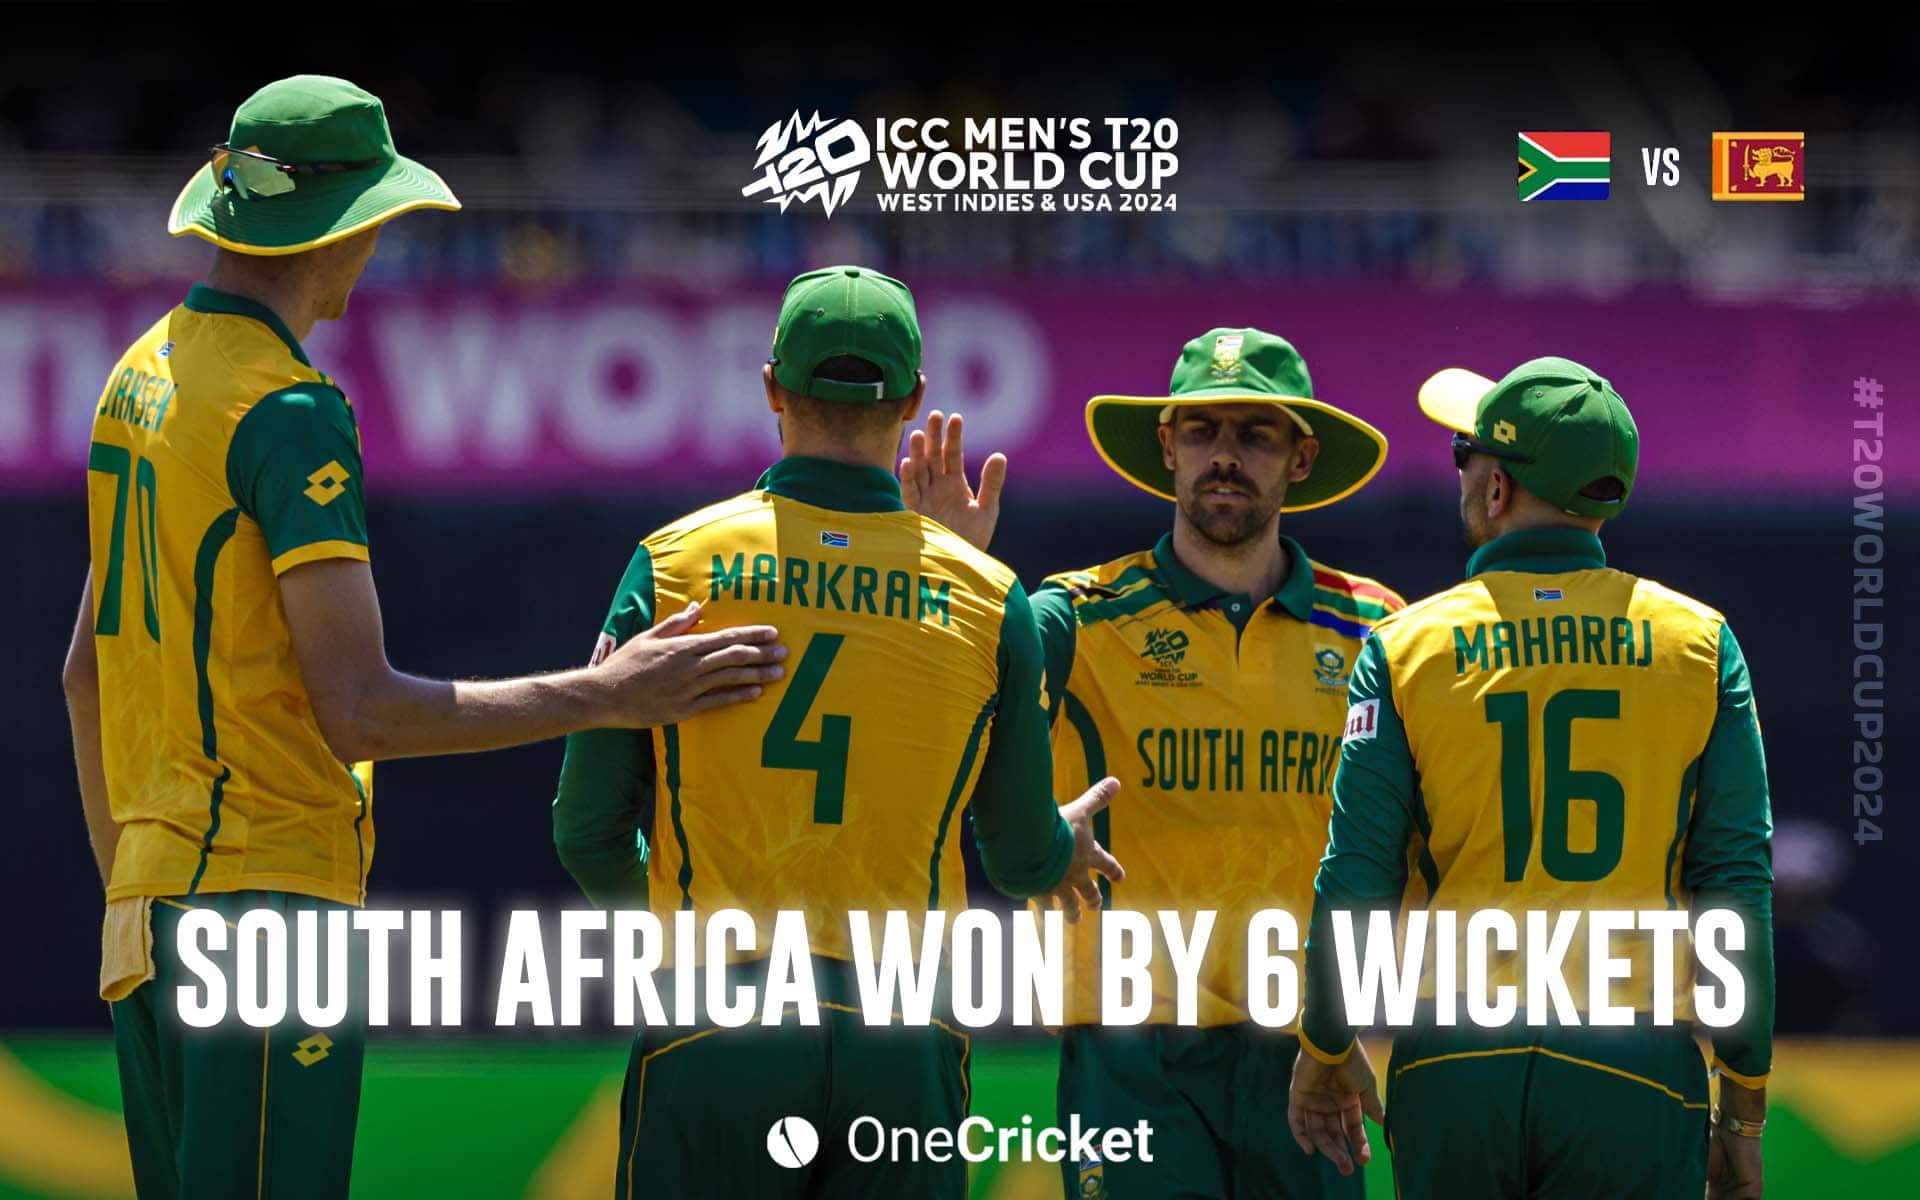 South Africa registered 6-wicket win vs SL (OneCricket)